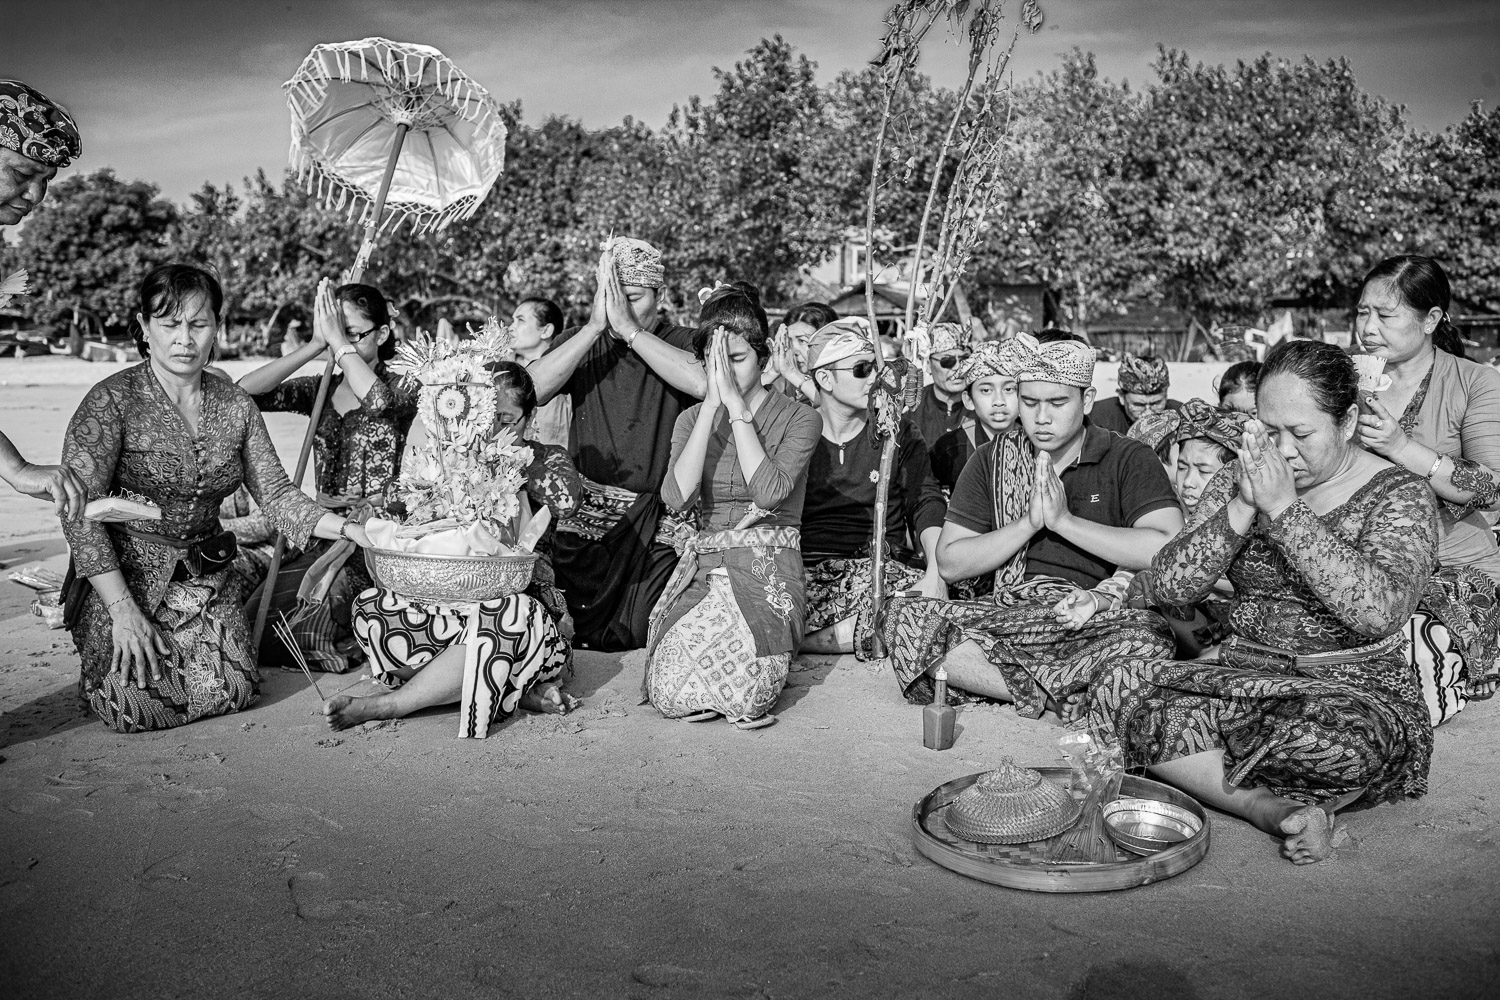 Ngaben cremation in Bali, Mr. A.A. Mangkling’s family members on the beach before releasing his spirit to the sea.